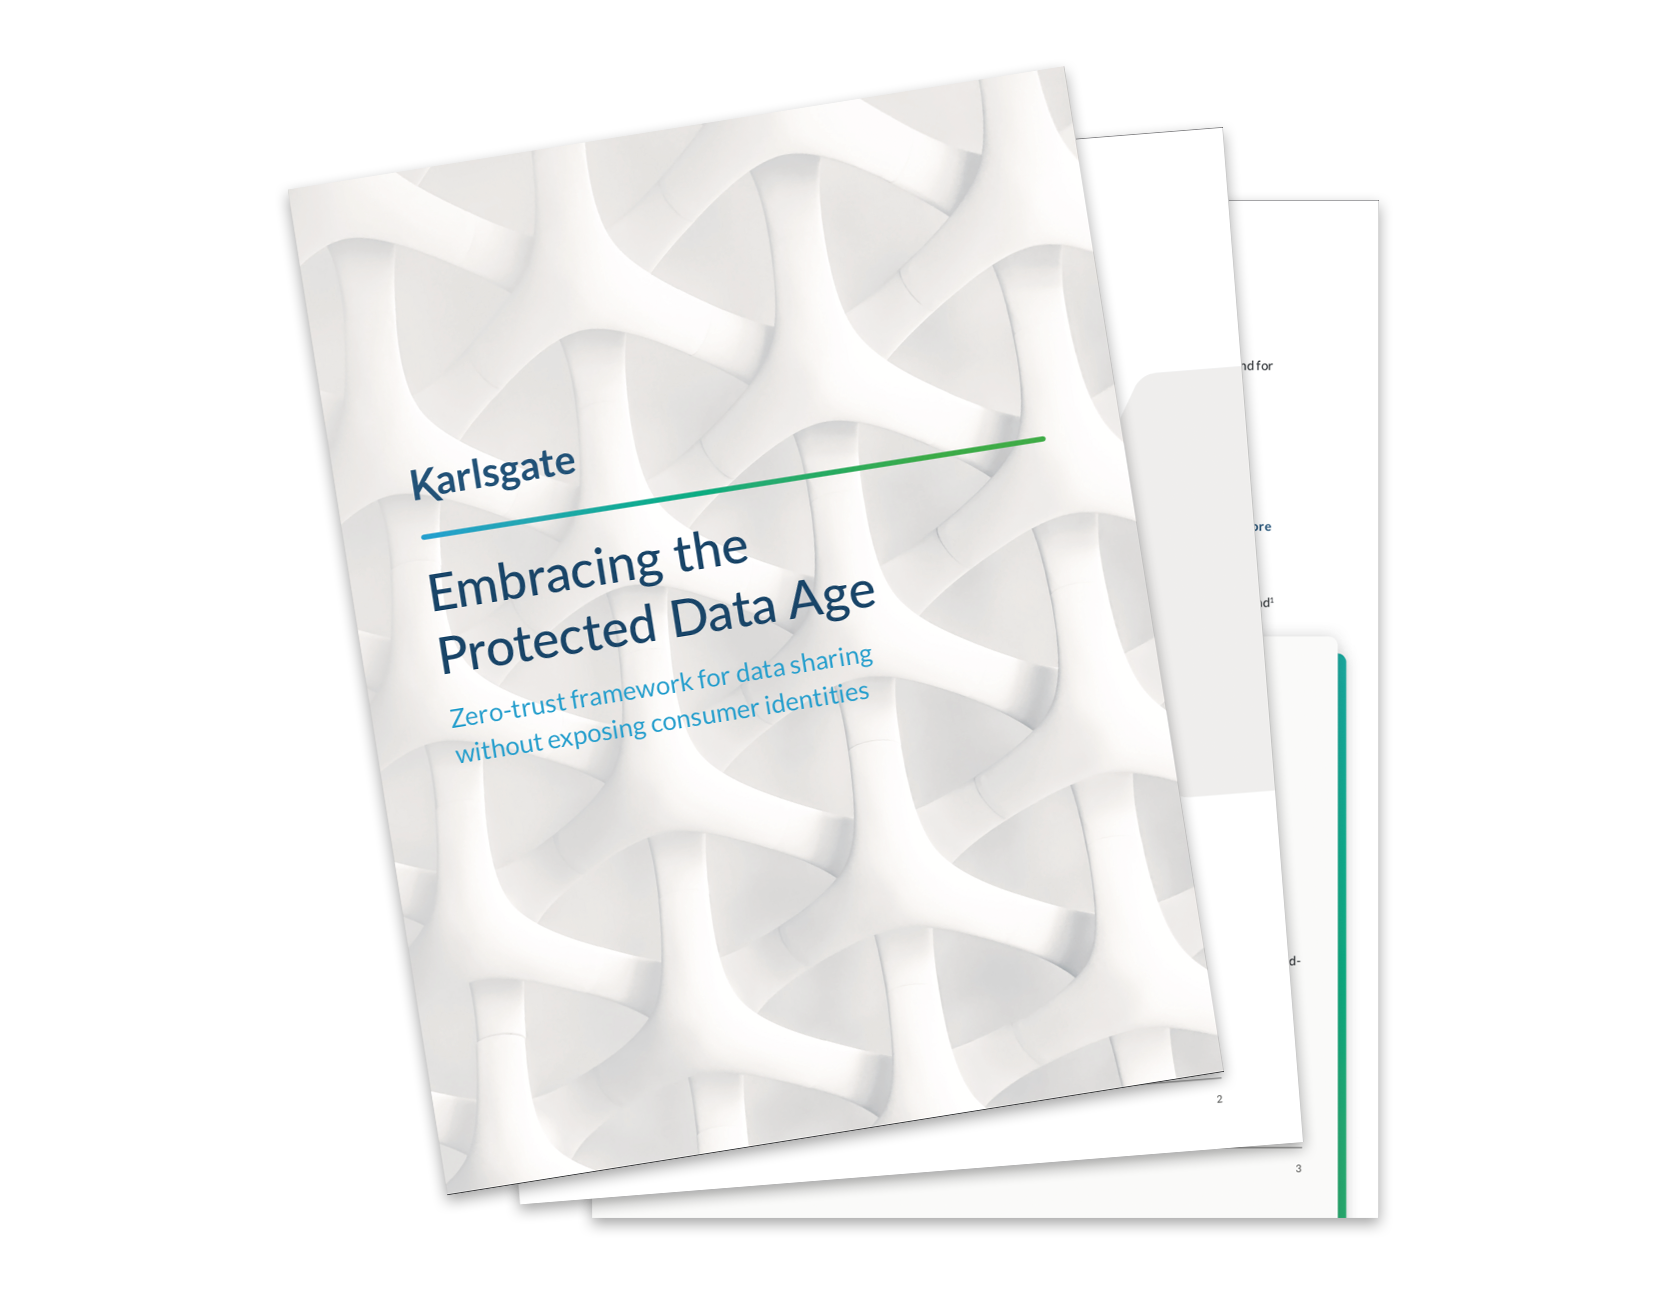 embracing-the-protected-data-age-karlsgate-082020